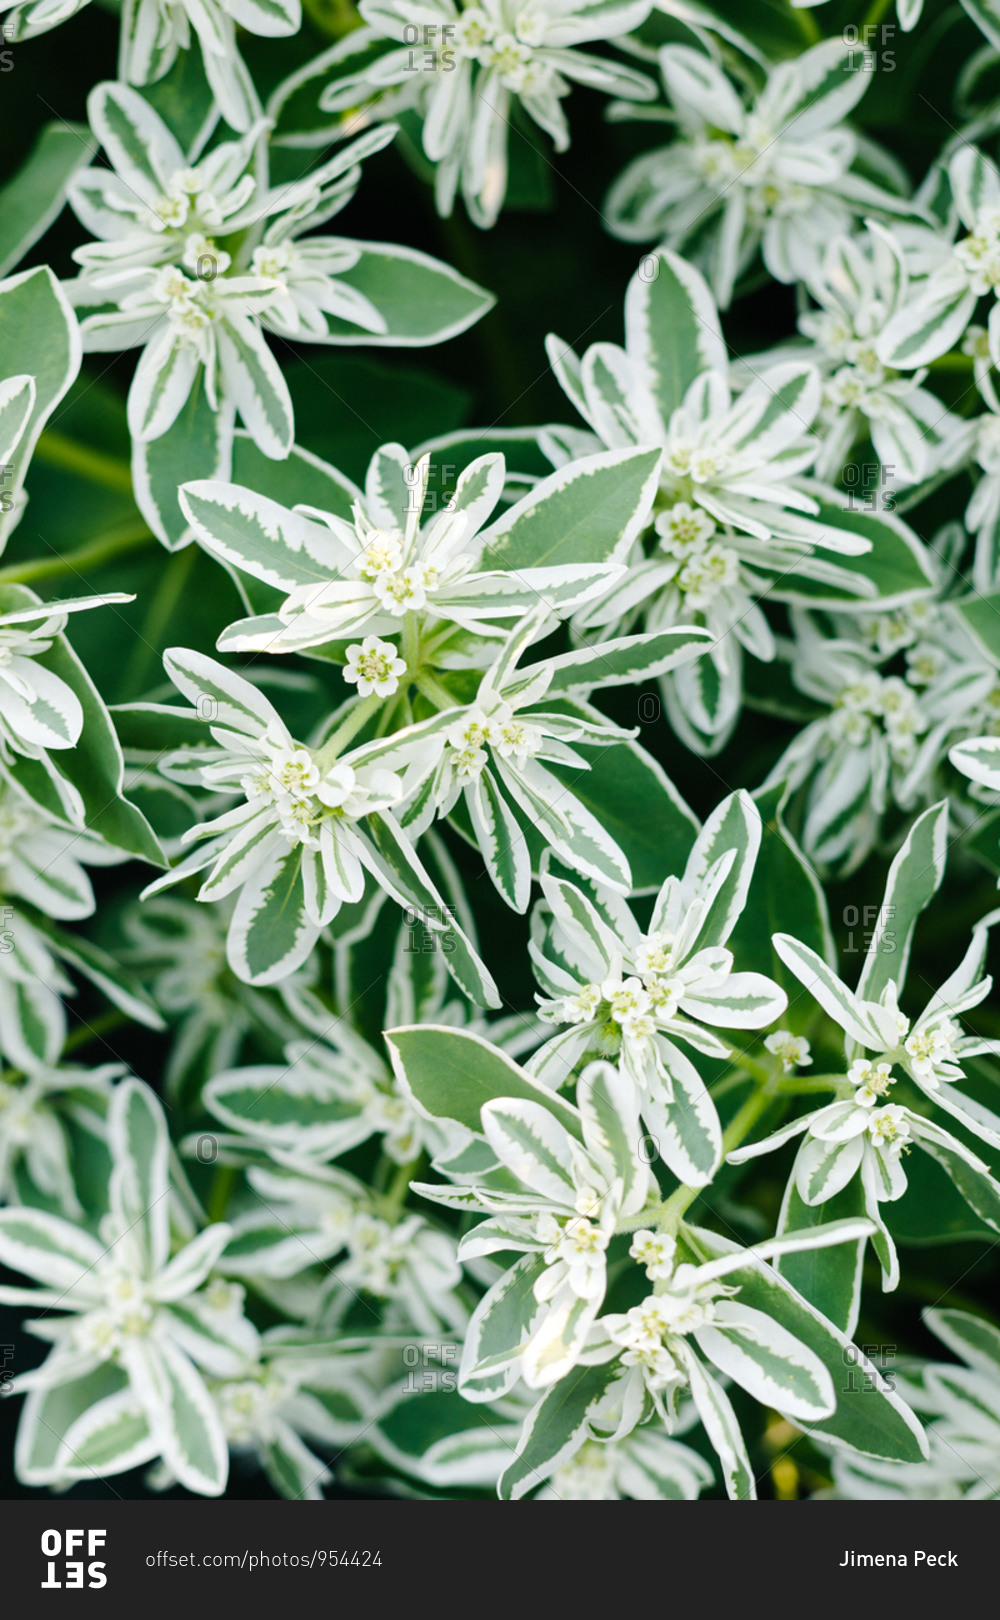 Close up to a lighted field of white flowers and green
leaves stock photo - OFFSET